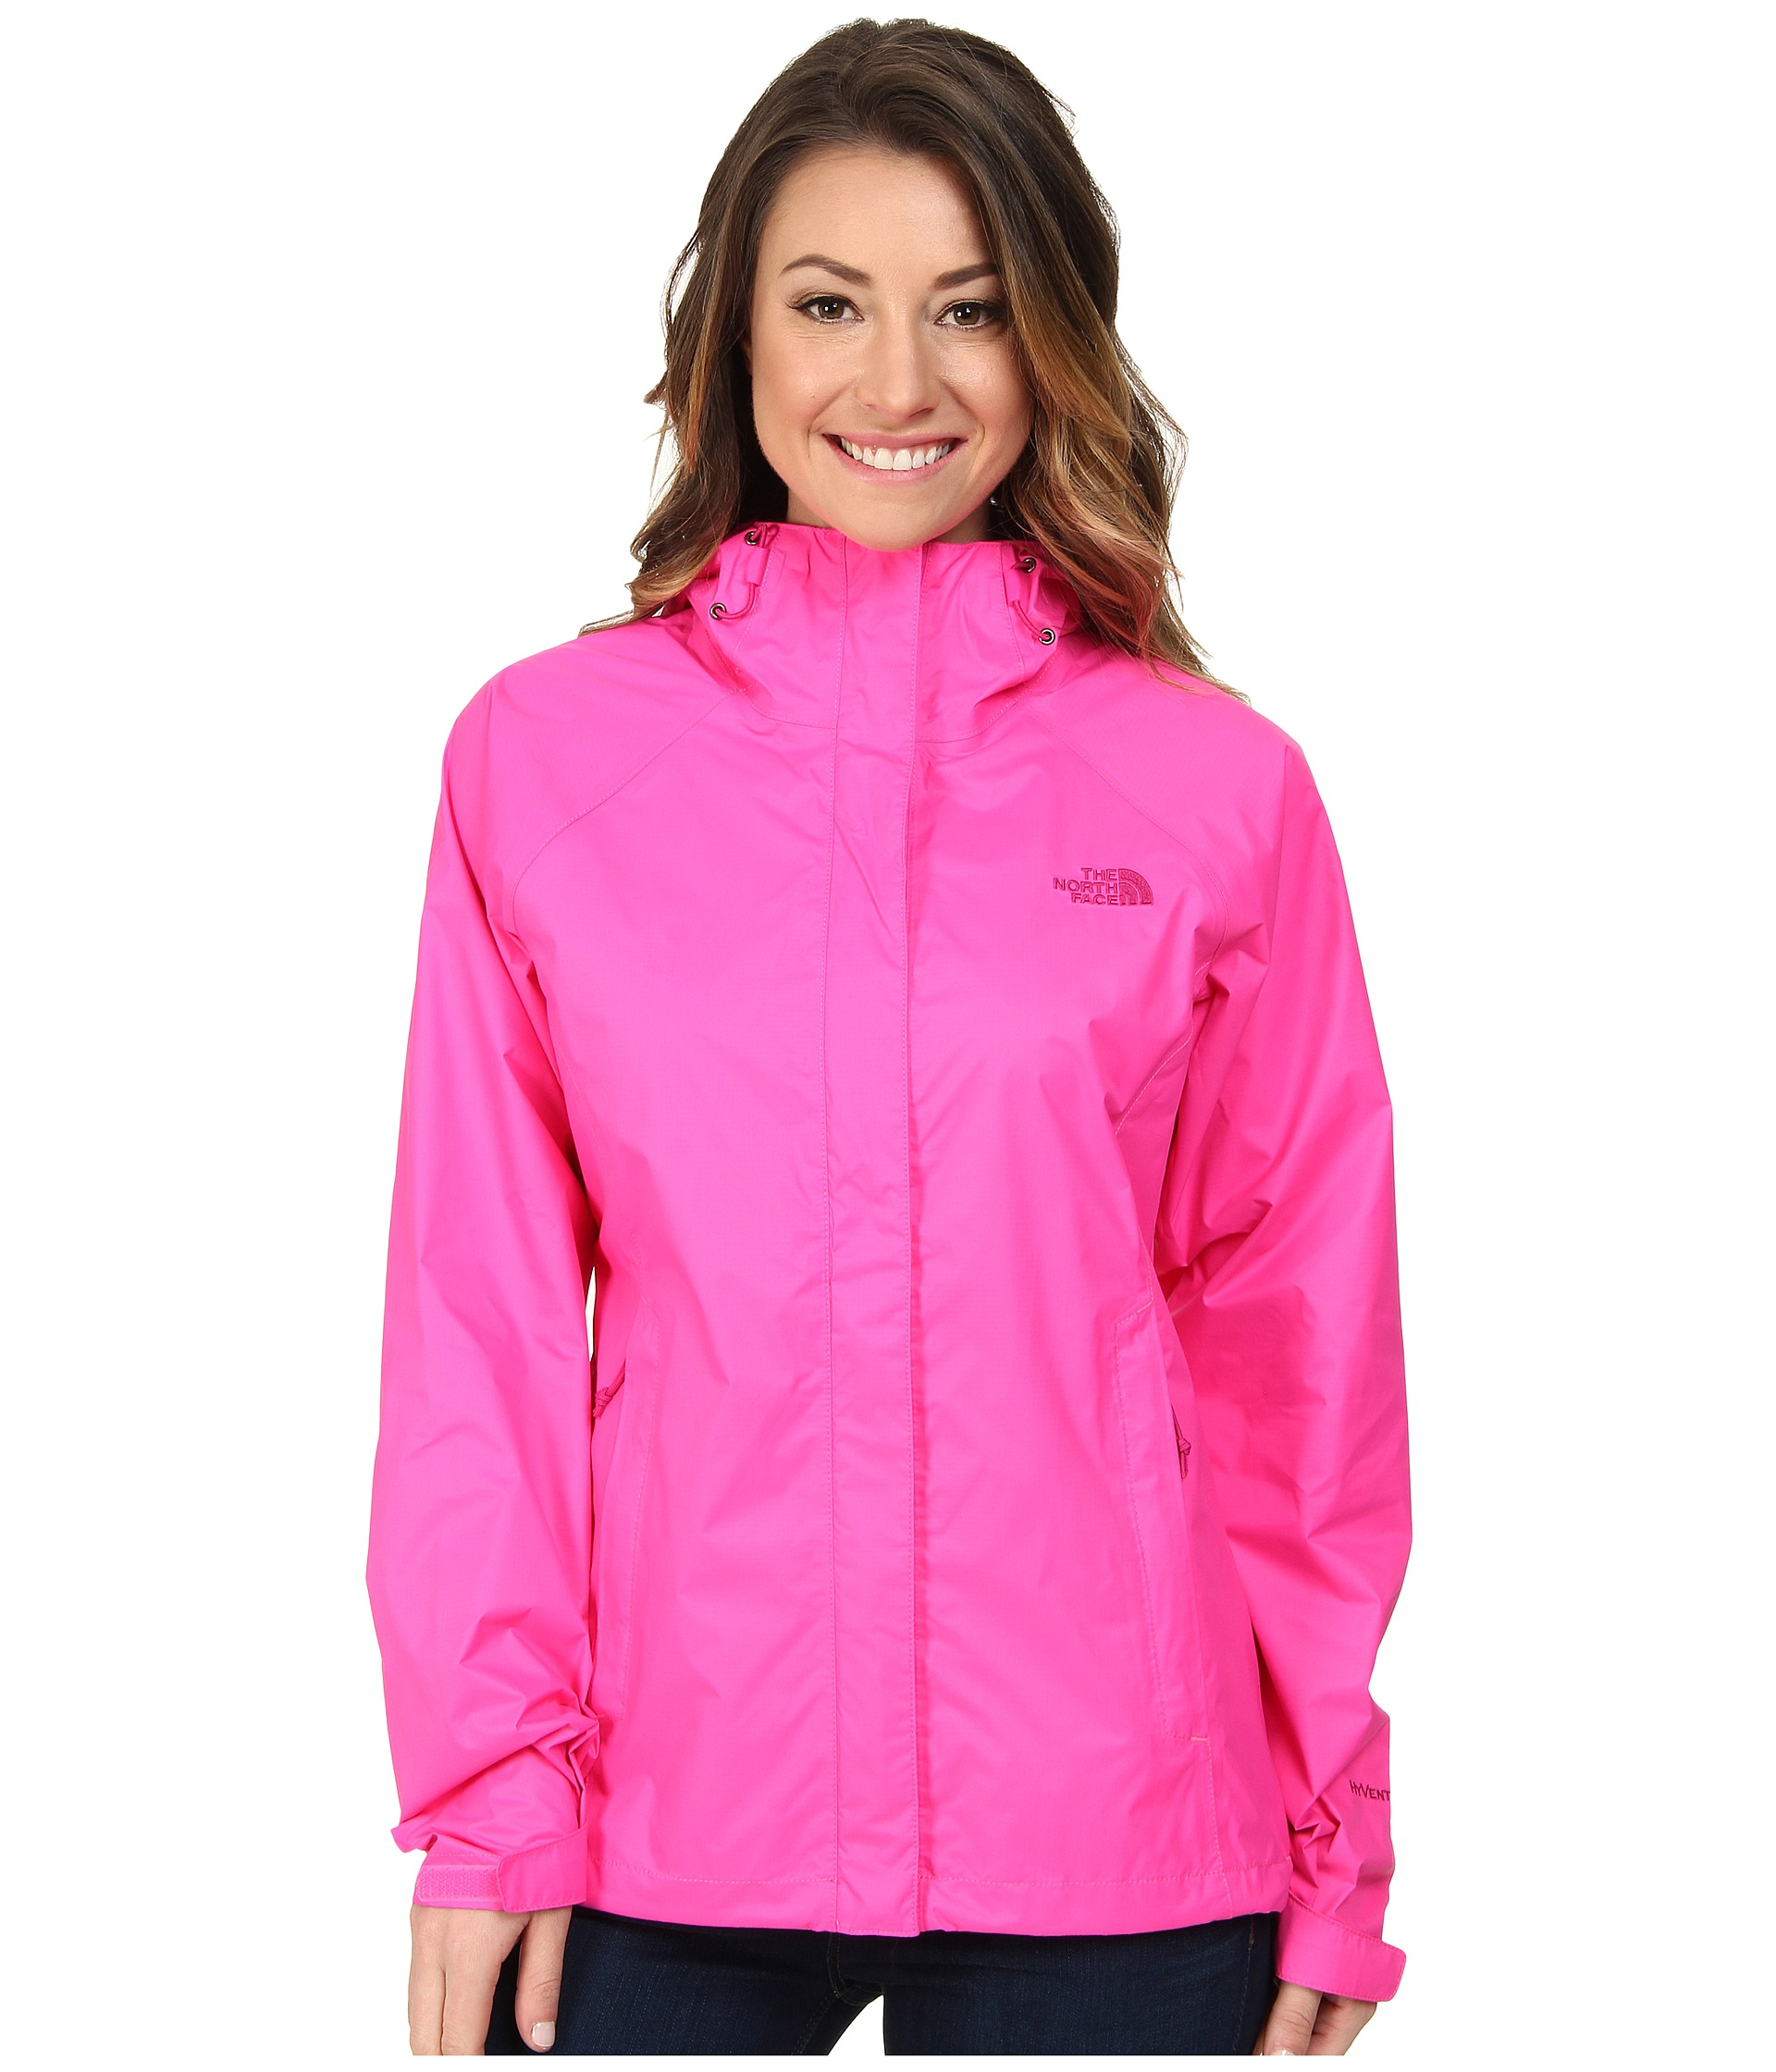 The North Face Venture Jacket in Pink - Lyst